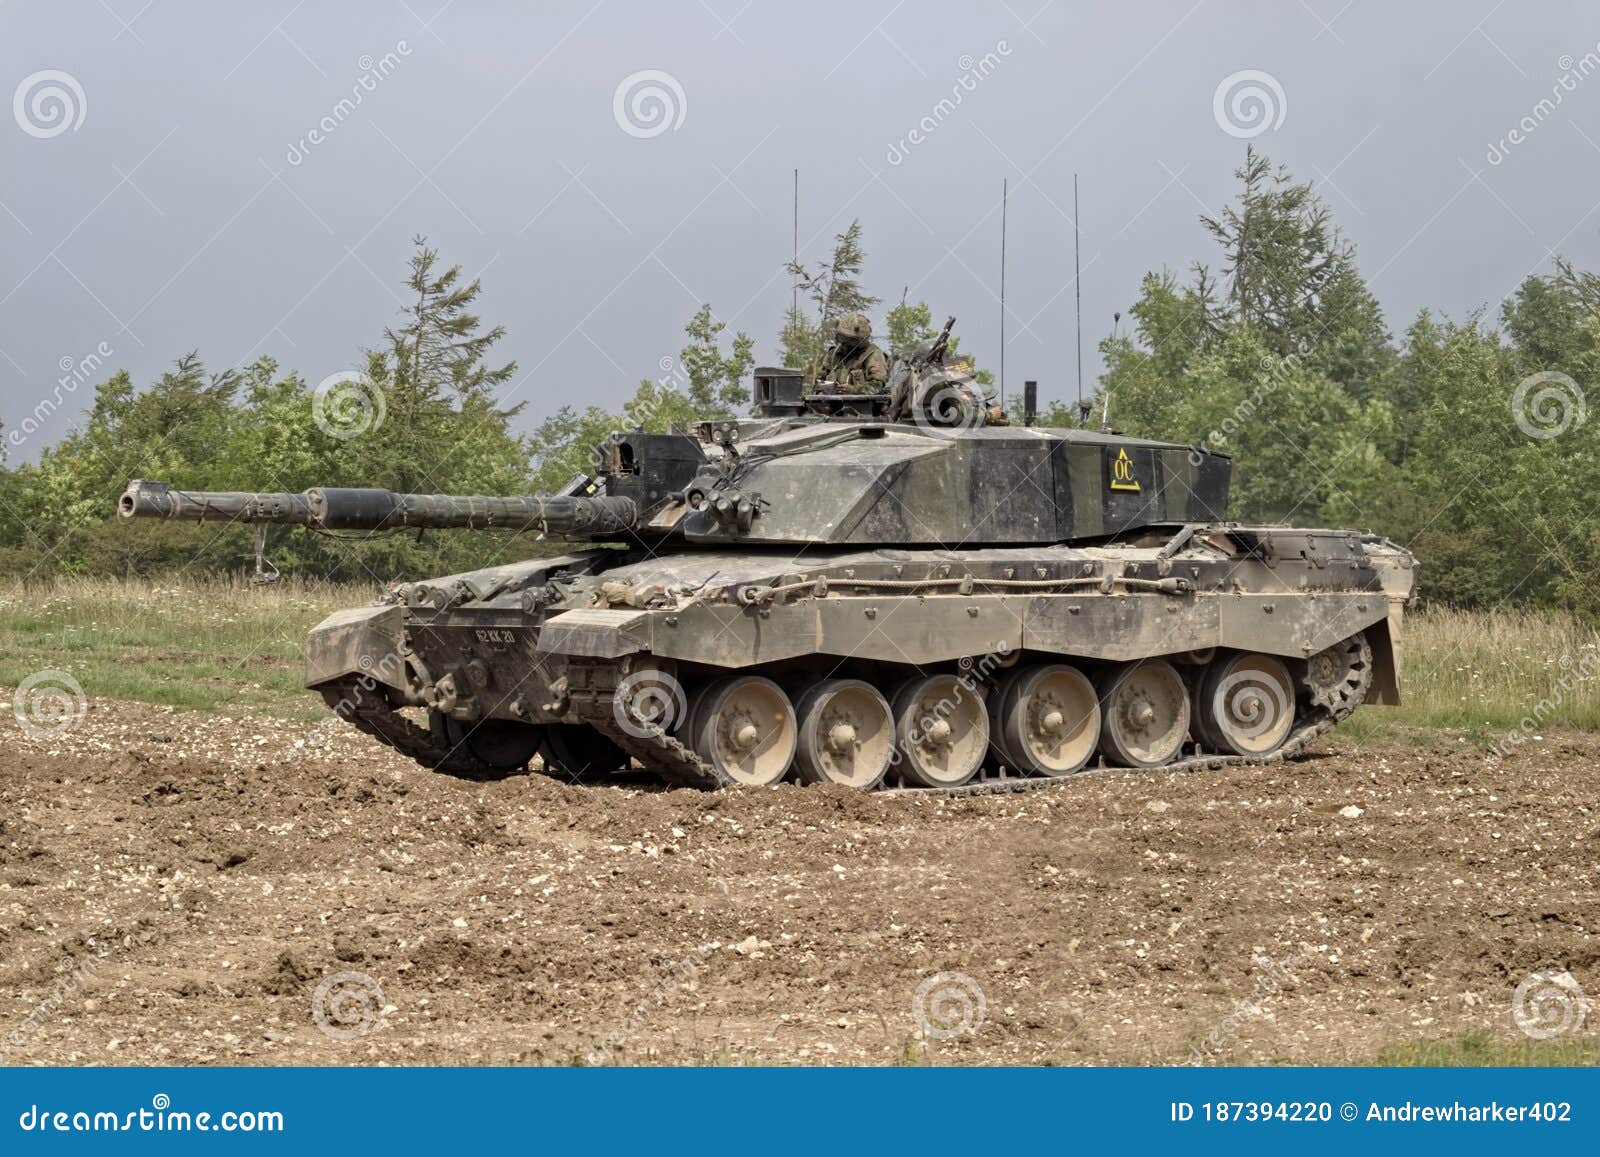 British Army Challenger 2 Main Battle Tank MBT Editorial Image - Image of main: 187394220